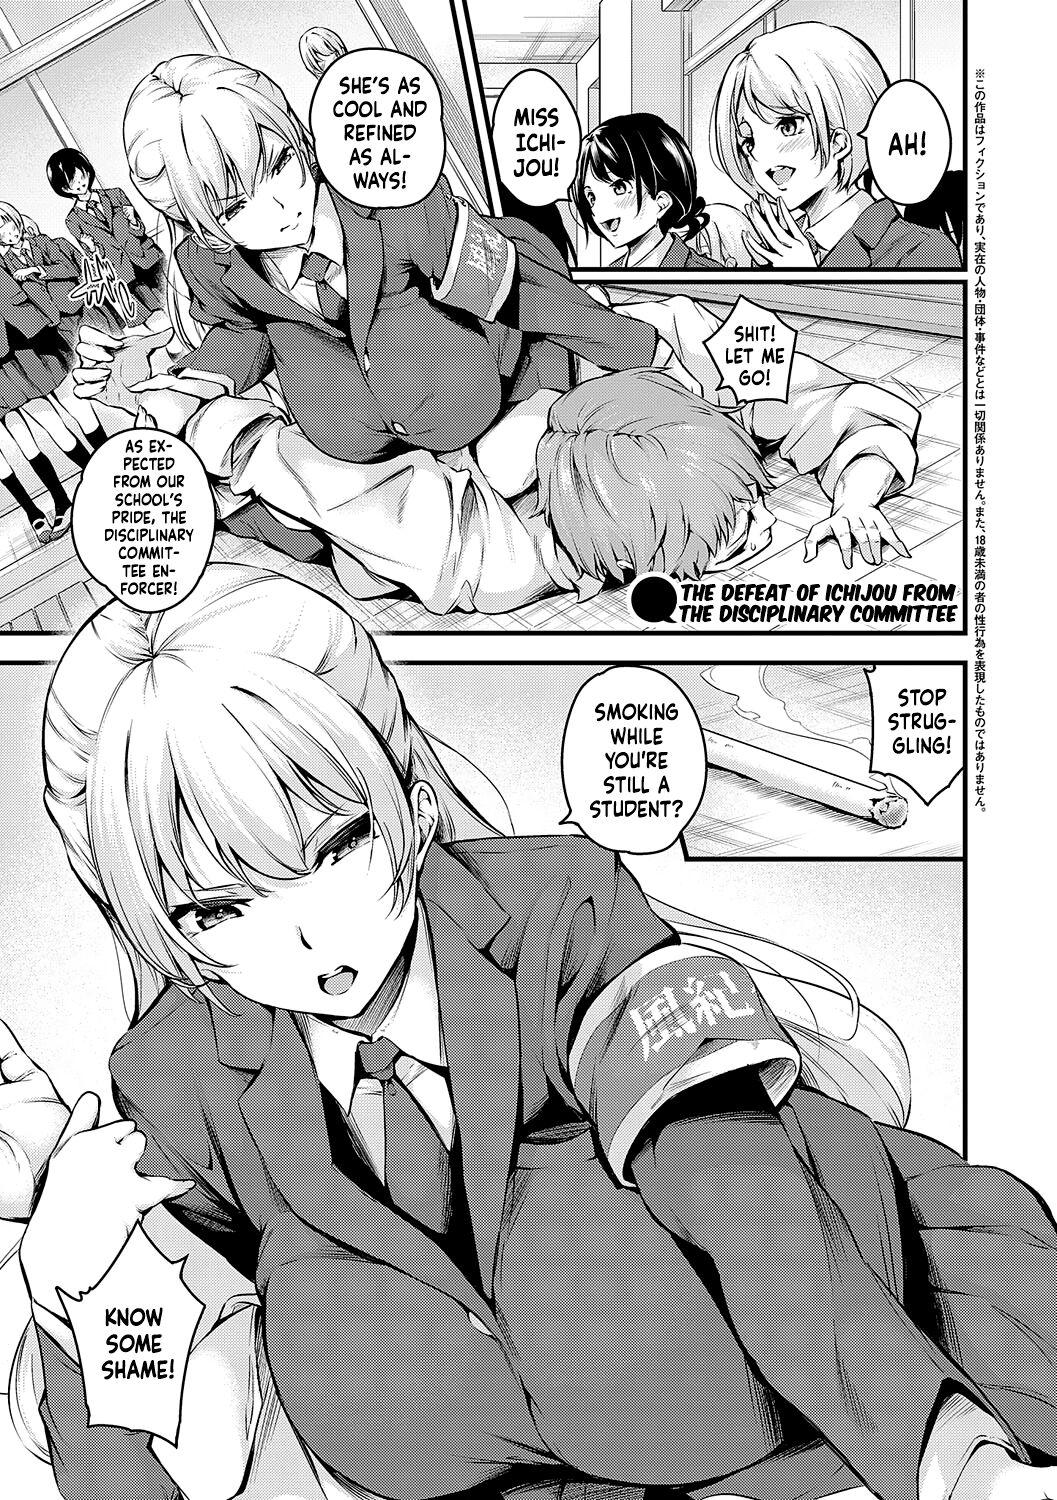 The Fuuki Iin Ichijou no Haiboku | The defeat of Ichijou from the disciplinary committee Real Amateur Porn - Page 1